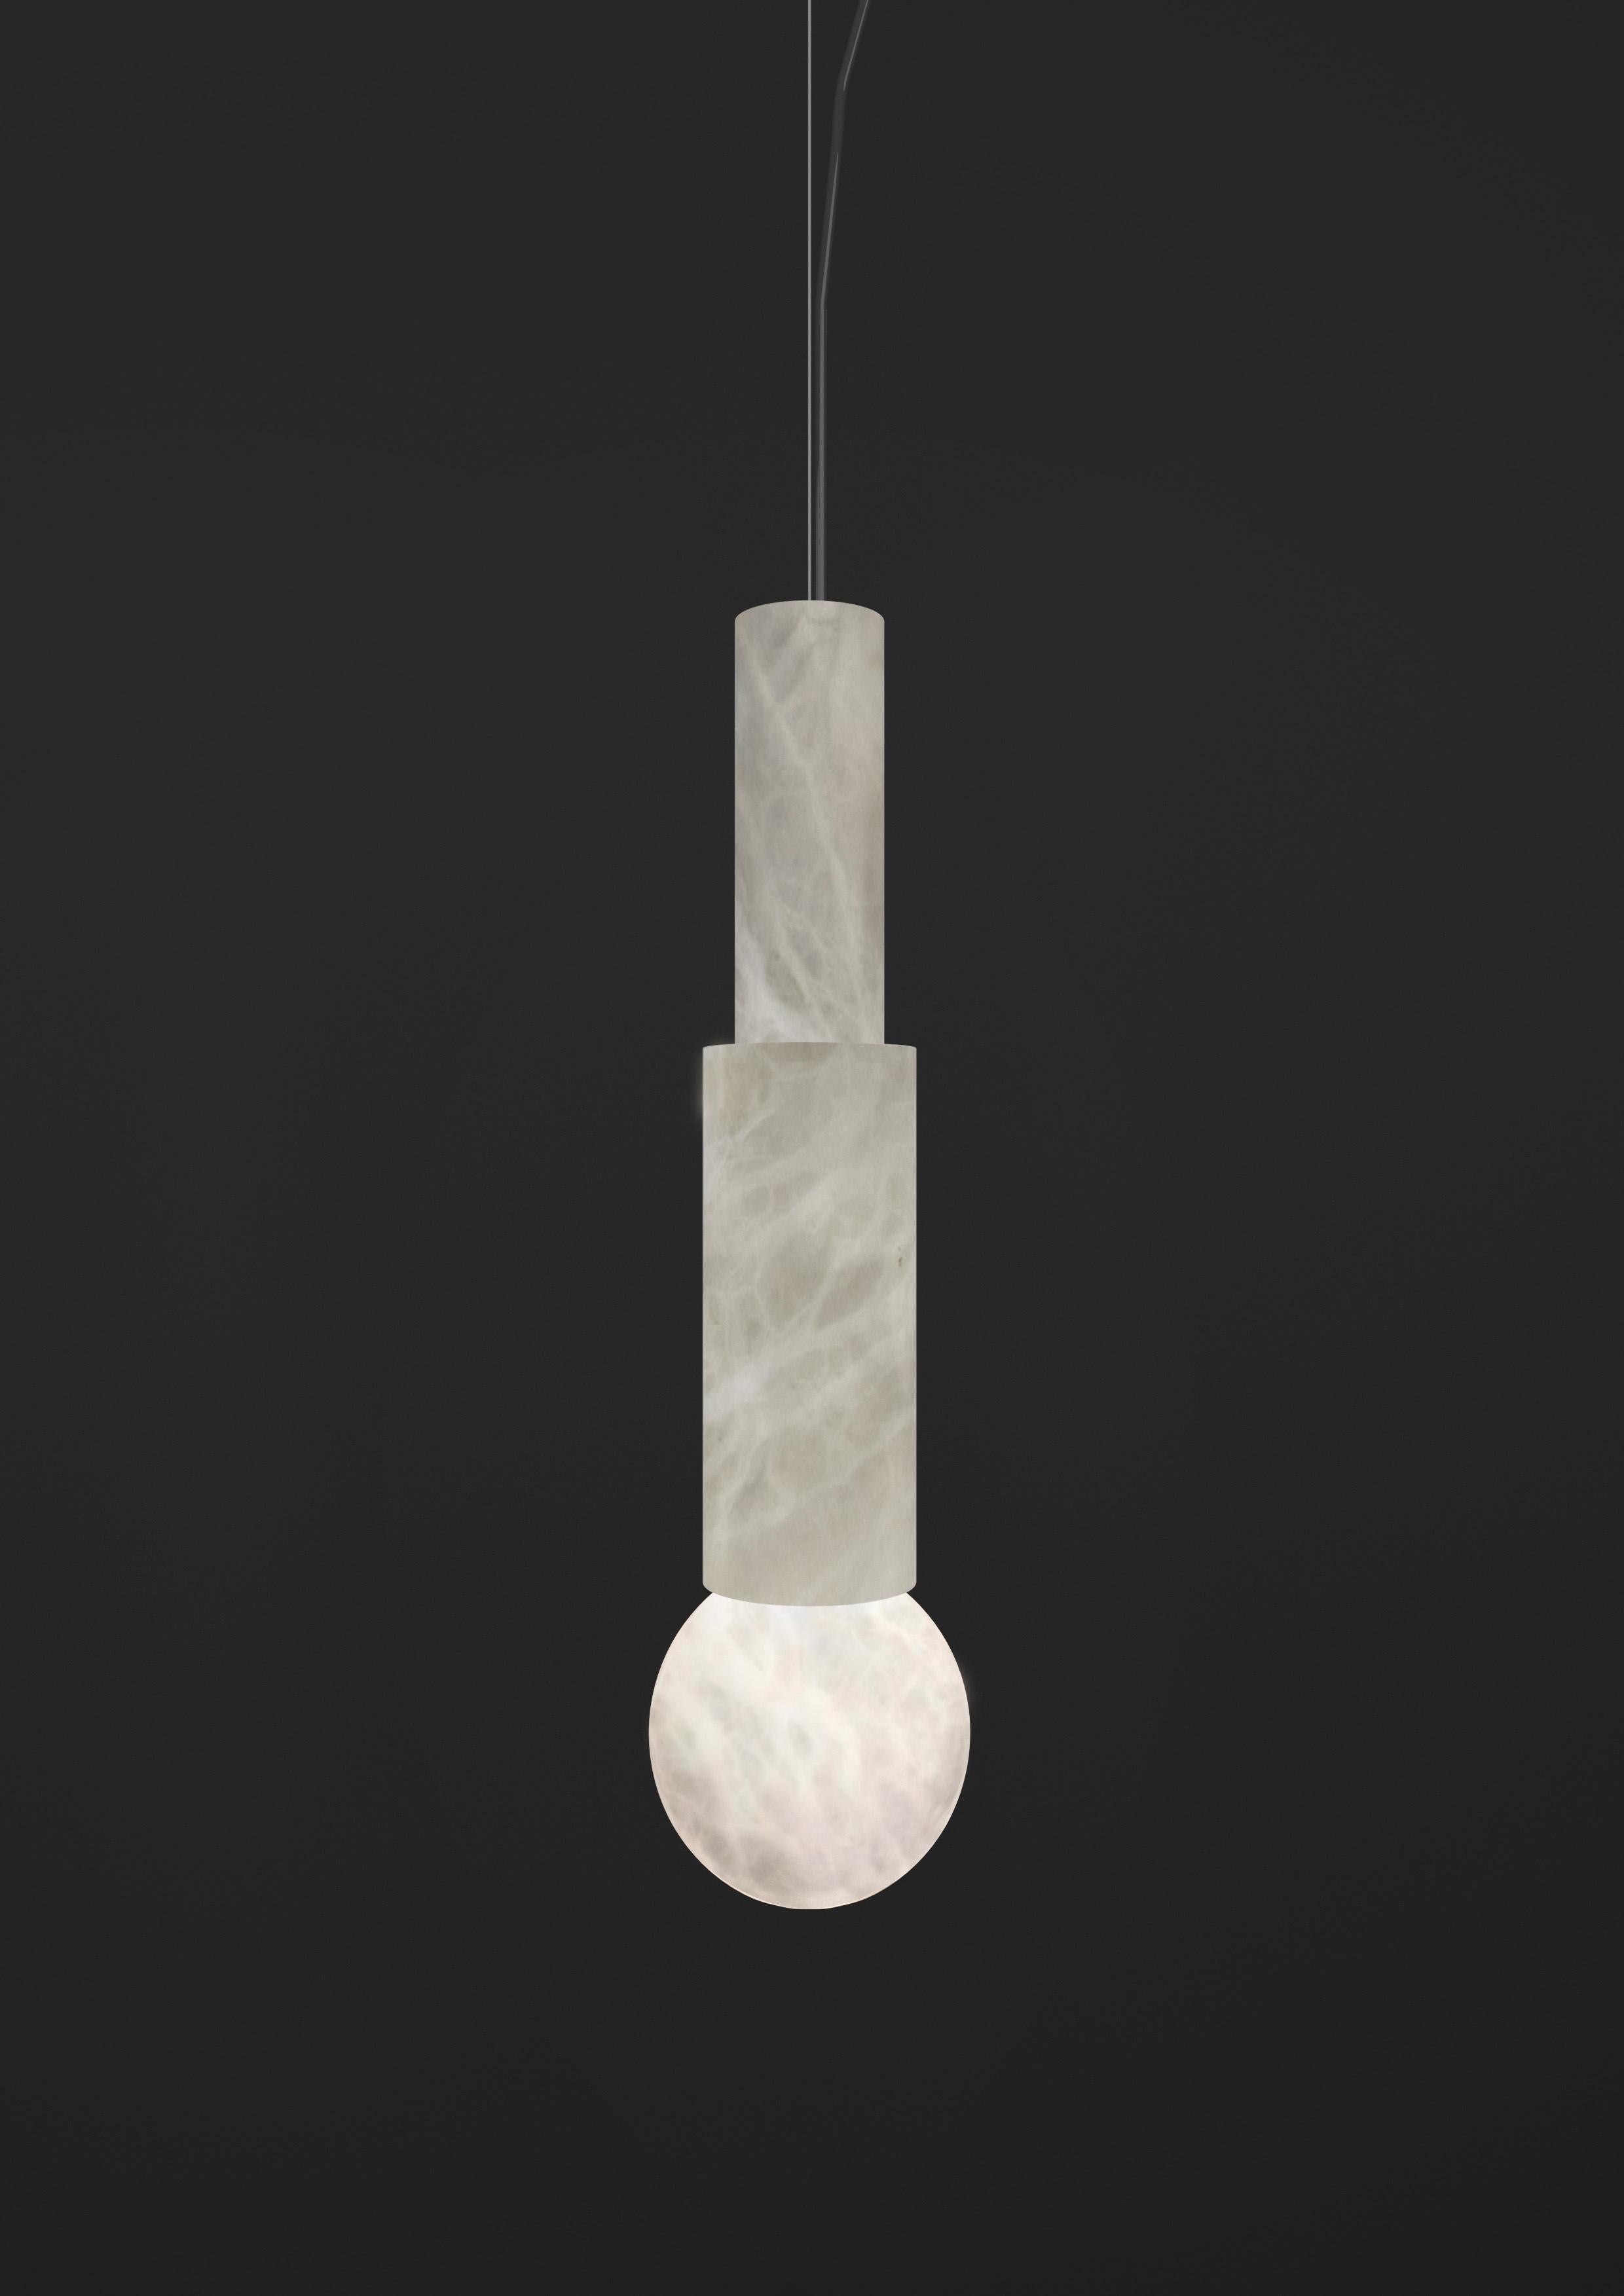 Galatea Pendant Lamp by Alabastro Italiano
Dimensions: D 15 x W 15 x H 60 cm.
Materials: White alabaster.

All our lamps can be wired according to each country. If sold to the USA it will be wired for the USA for instance.

Galatea was a Nereid